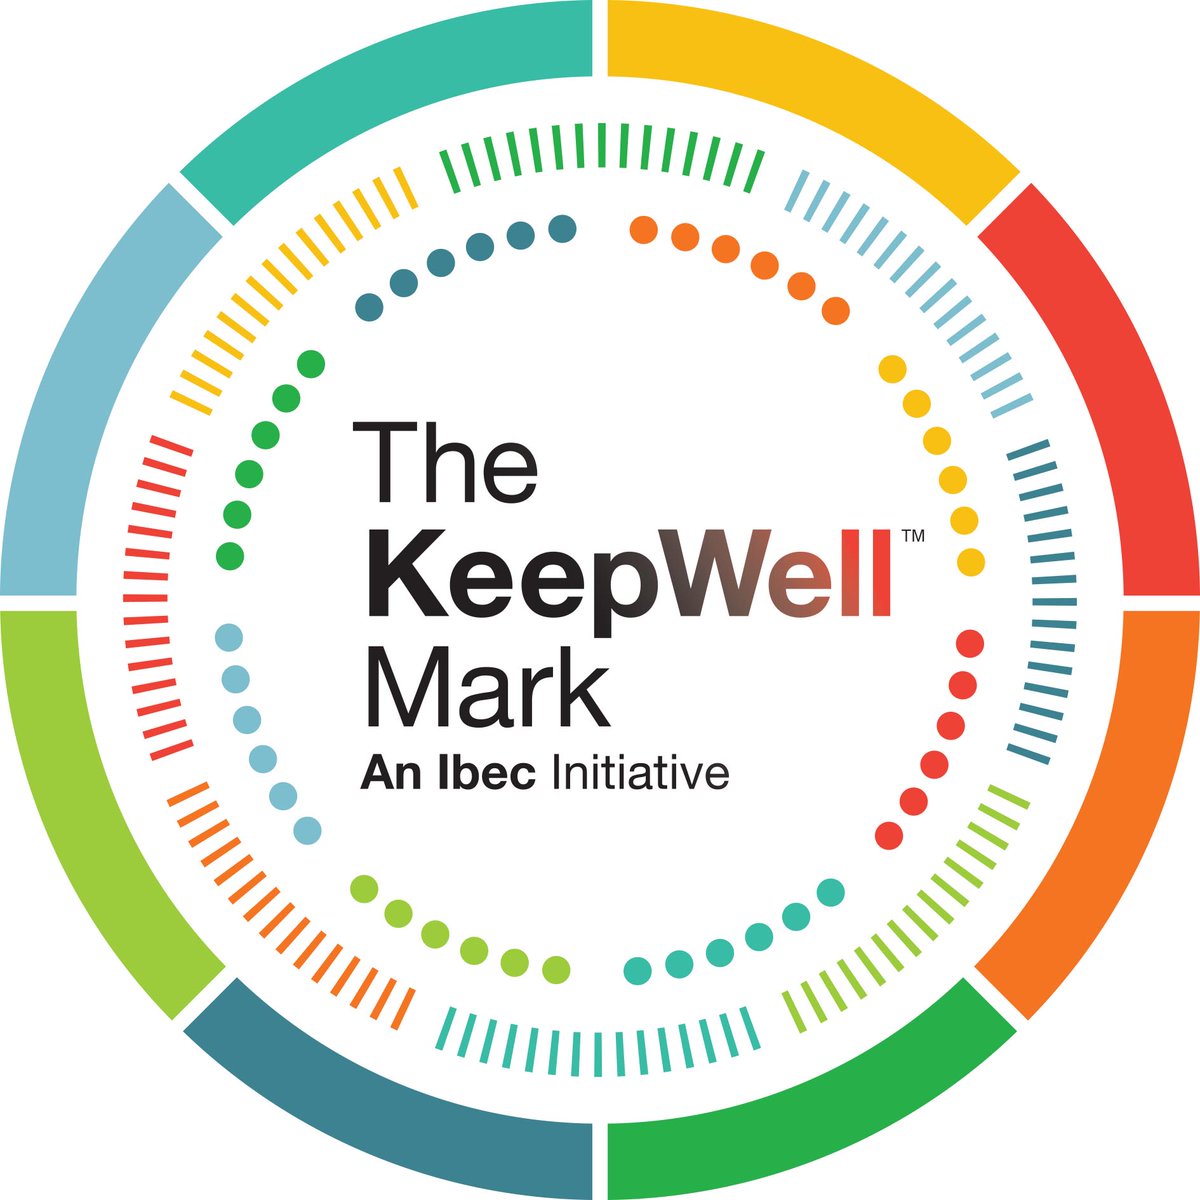 Doing the right thing for our people is in the DNA of #Elavon. It's seen us recognised with The KeepWell Mark for leading the way in supporting the health and wellbeing of our teams. Read more here: ow.ly/RQZz50LixvO